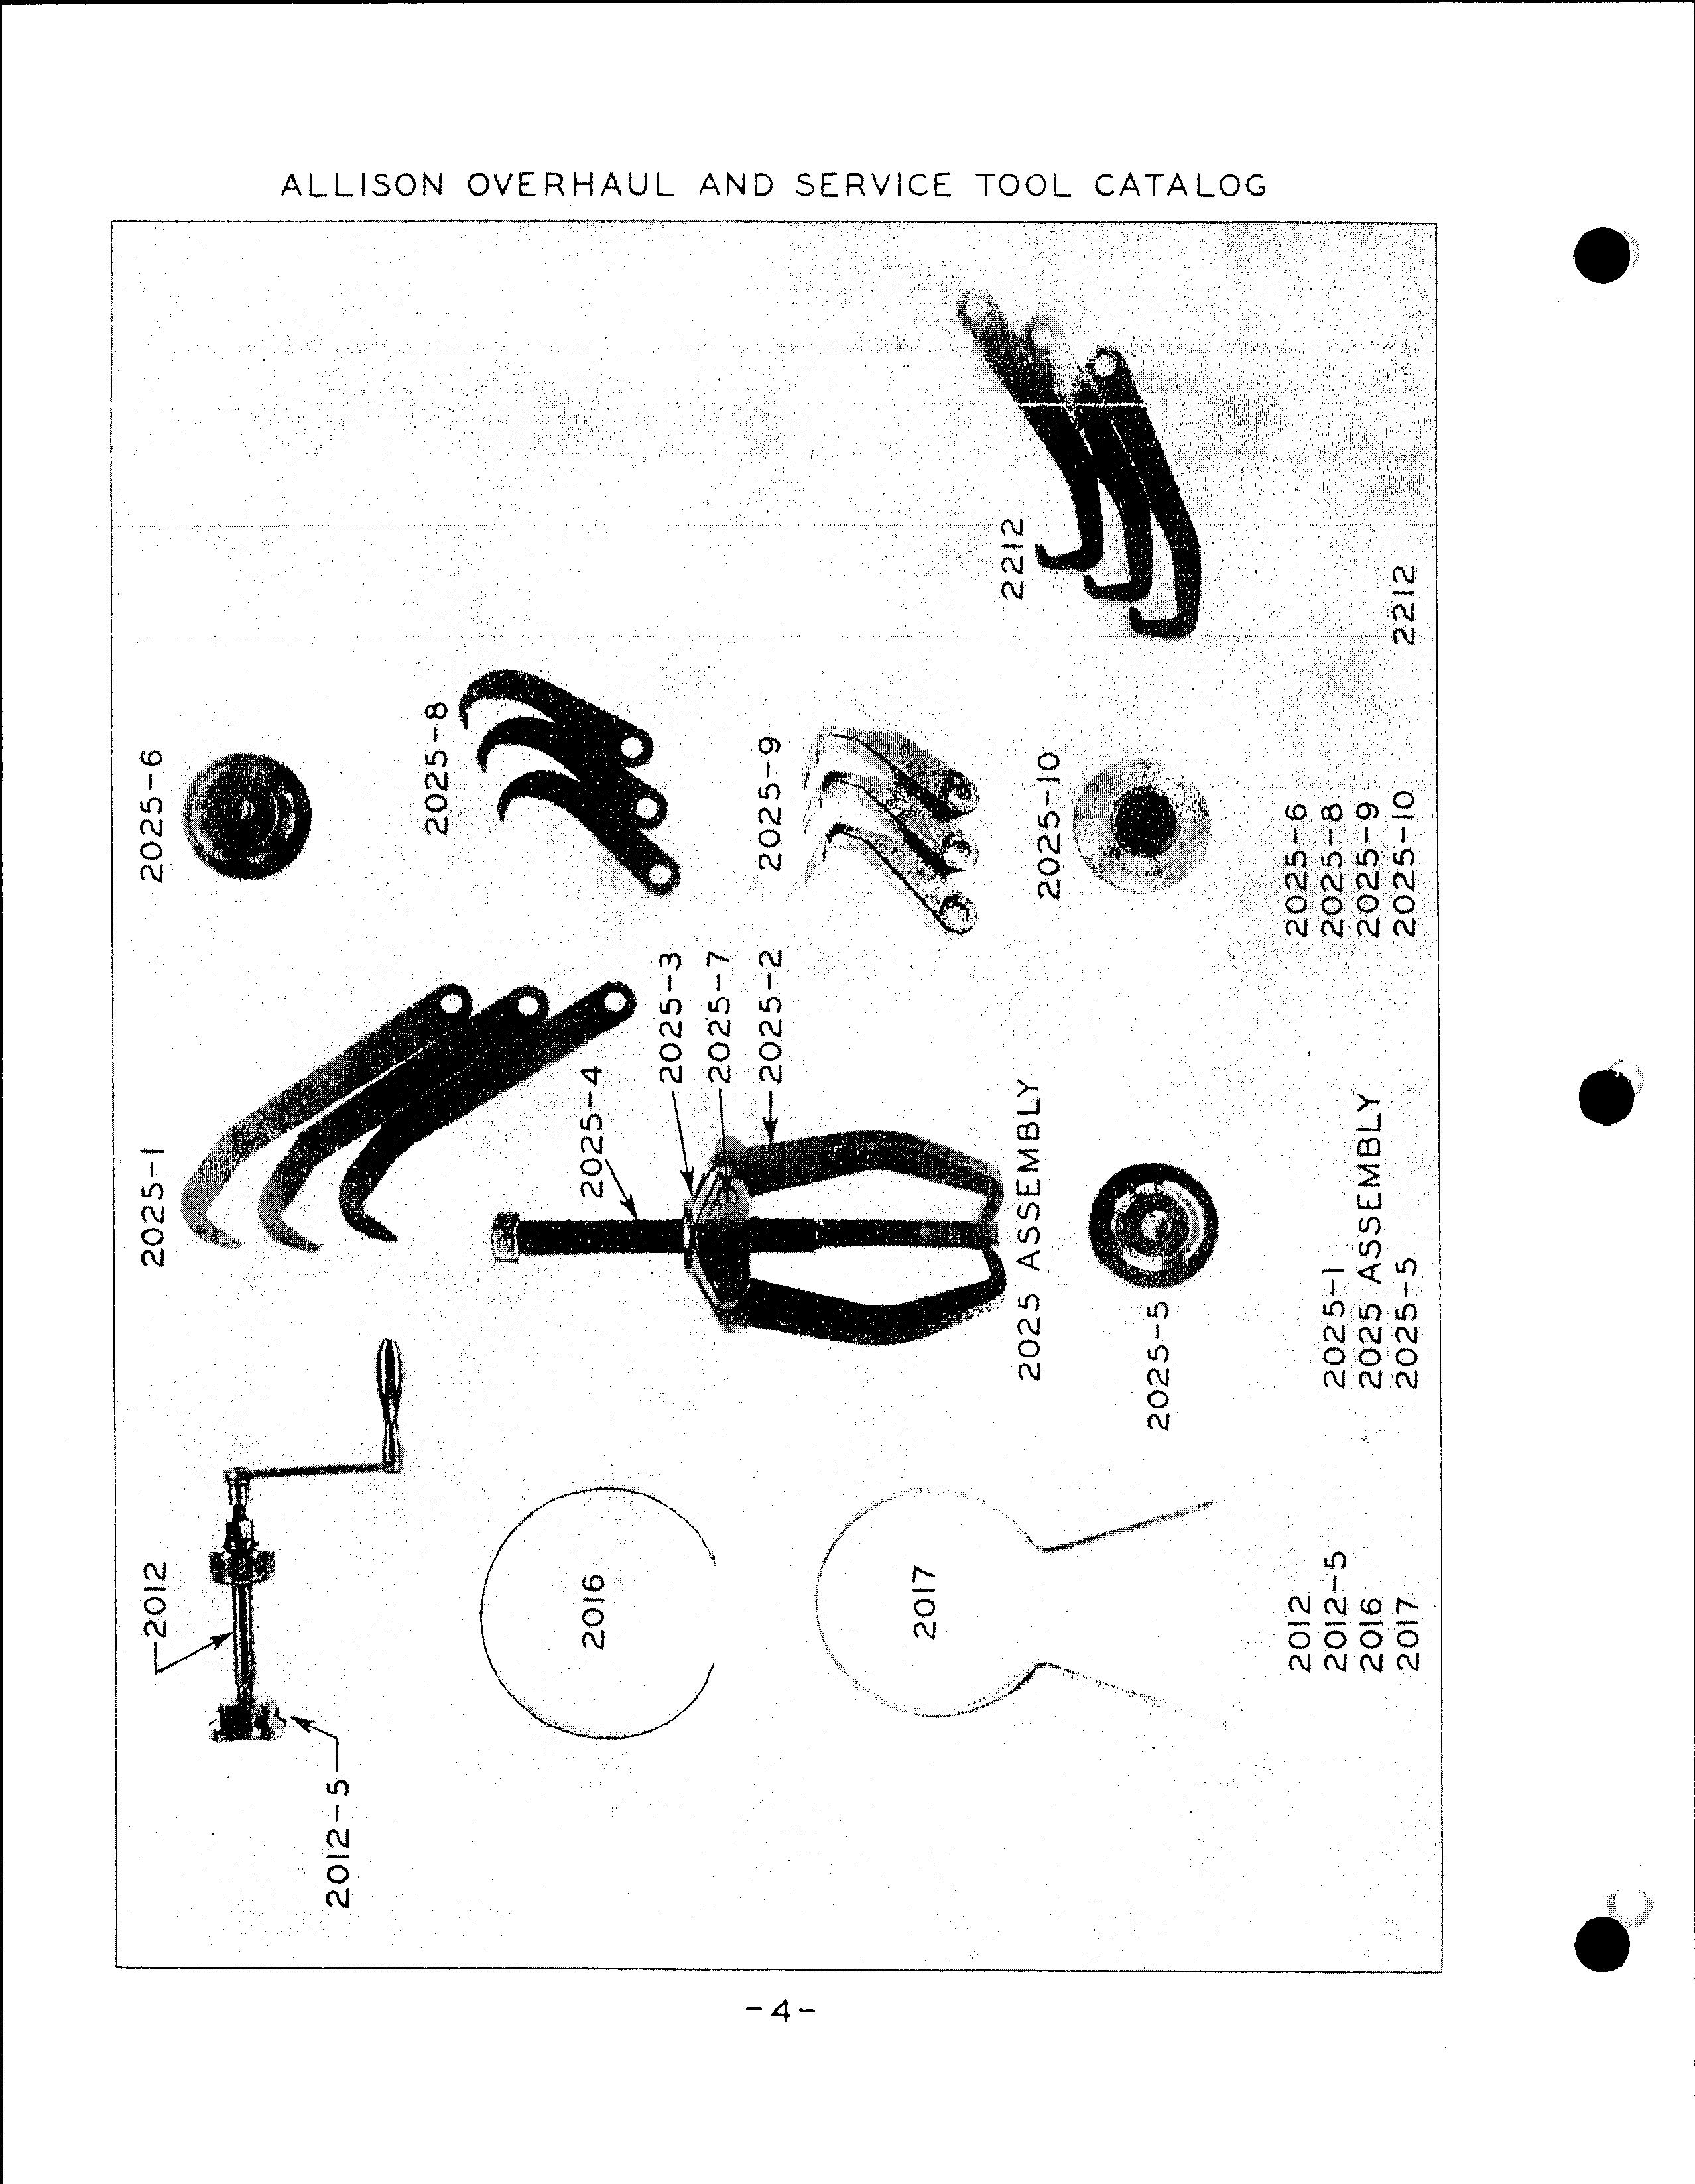 Sample page 6 from AirCorps Library document: Commercial Overhaul and Service Tool Catalog for Allison Engines